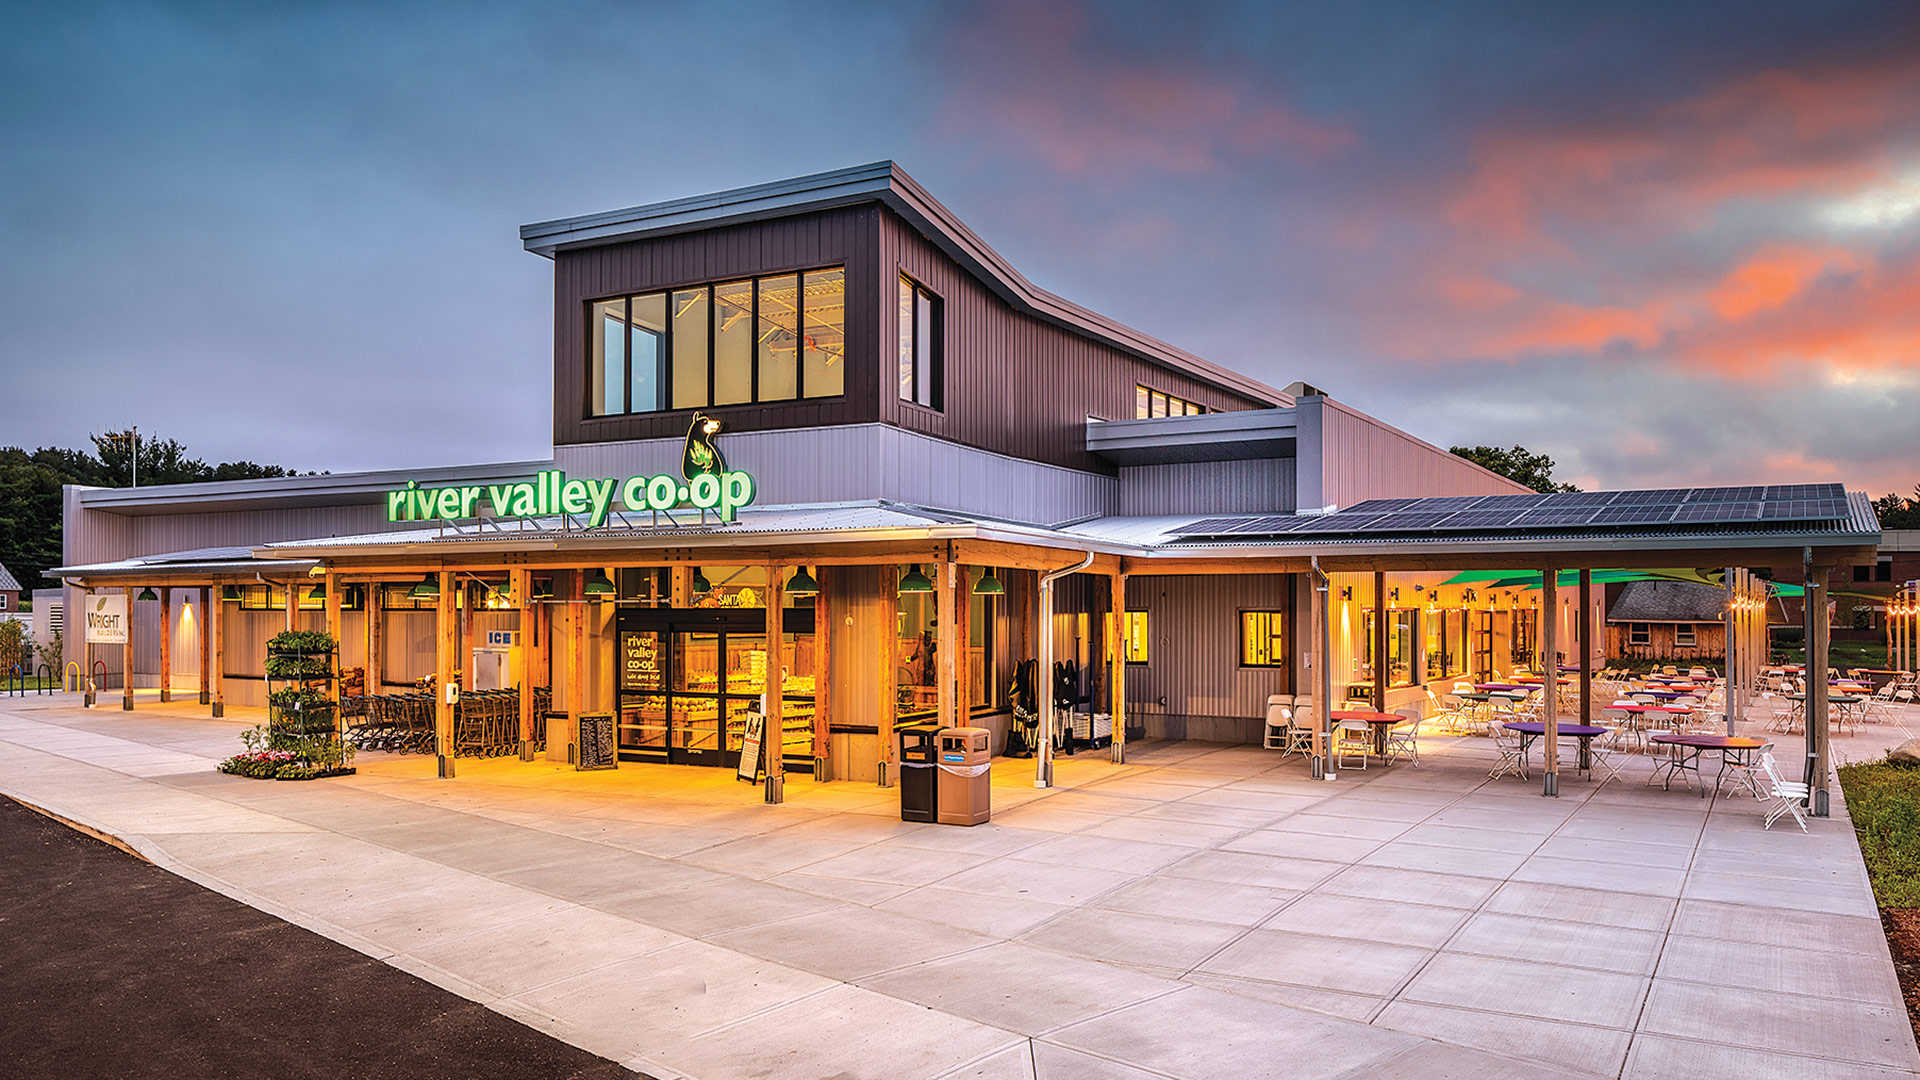 River Valley Co-op in Easthampton is a good example of a green building, a niche Wright Builders specializes in.